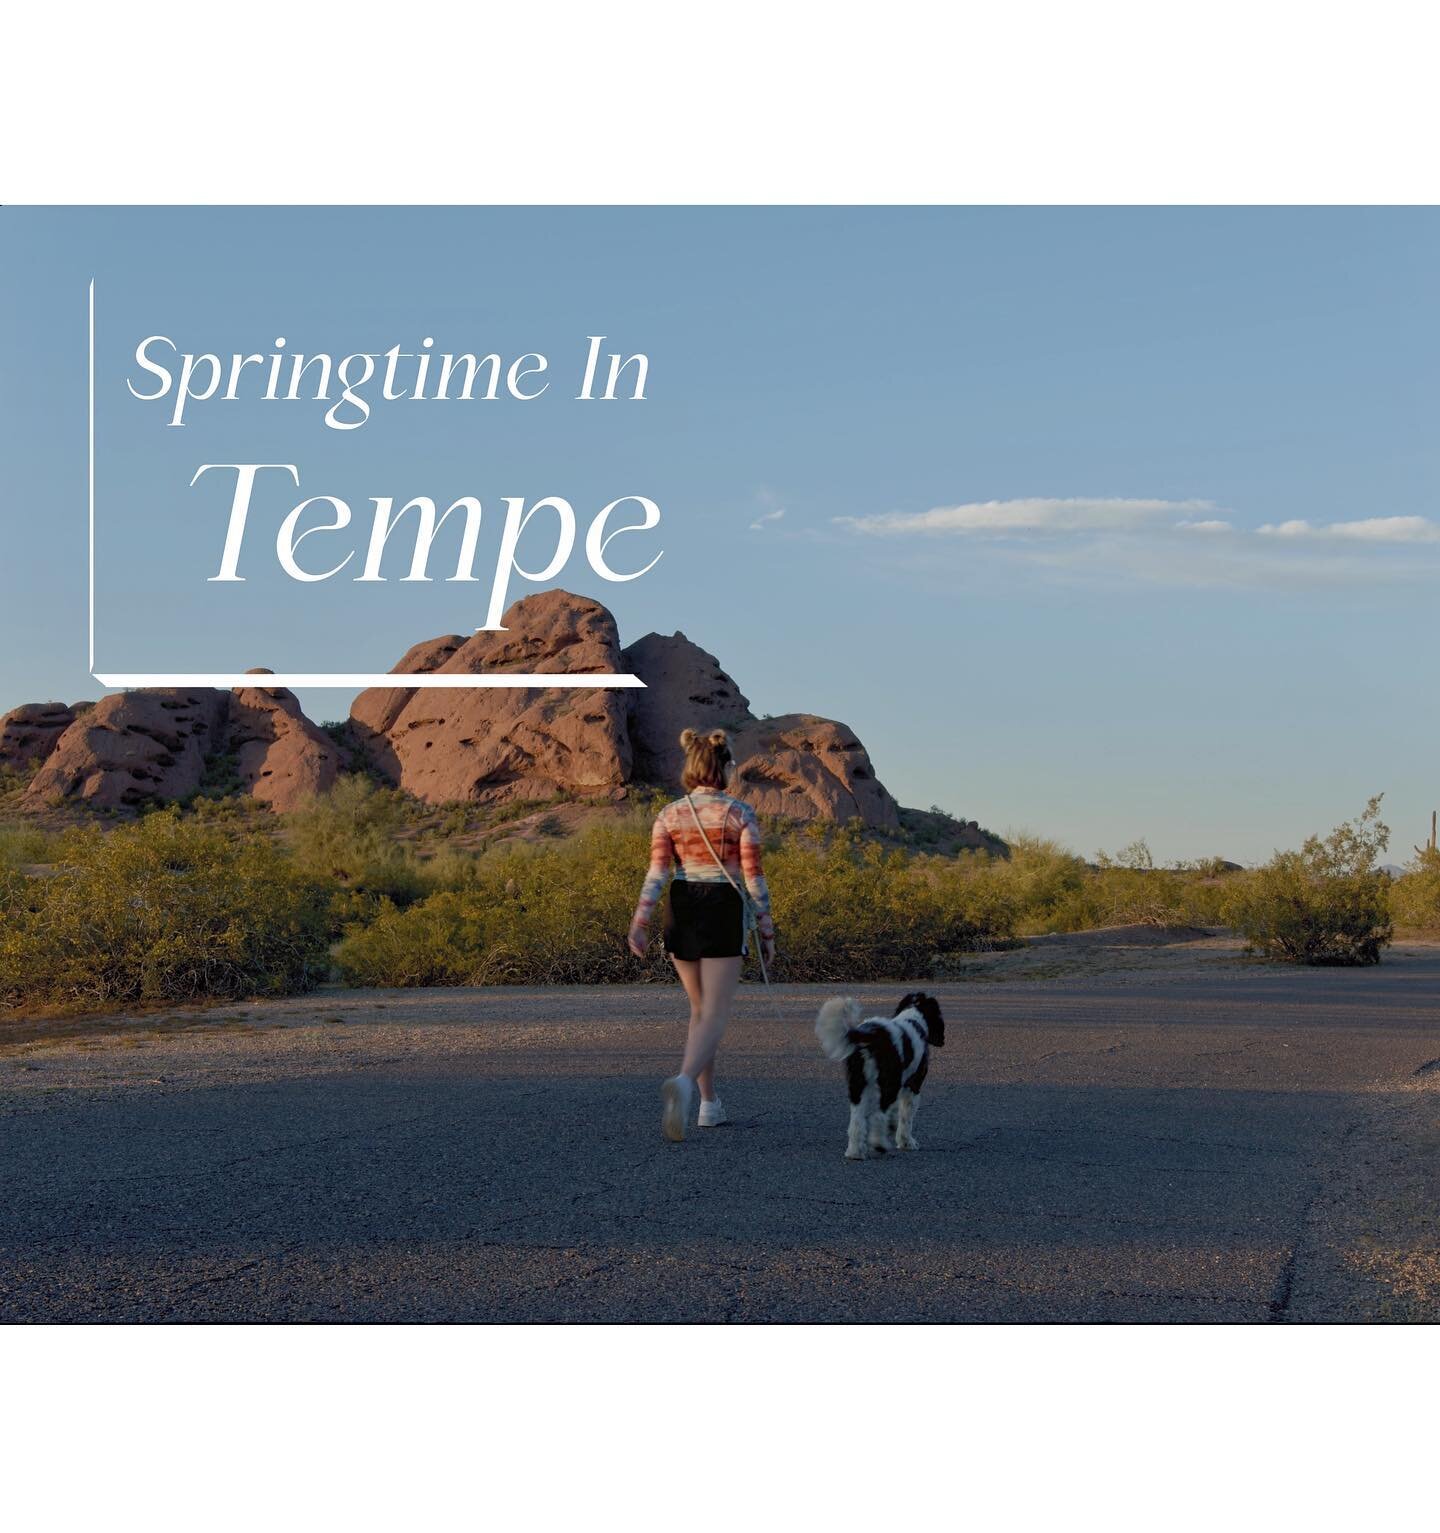 Billie and I had the pleasure of taking a leisurely stroll through Papago park with our buddy @zane_berry_dp on a lovely evening this spring. Some of the footage he snagged along the way is in his new short film, Springtime in Tempe. 

Head over to h